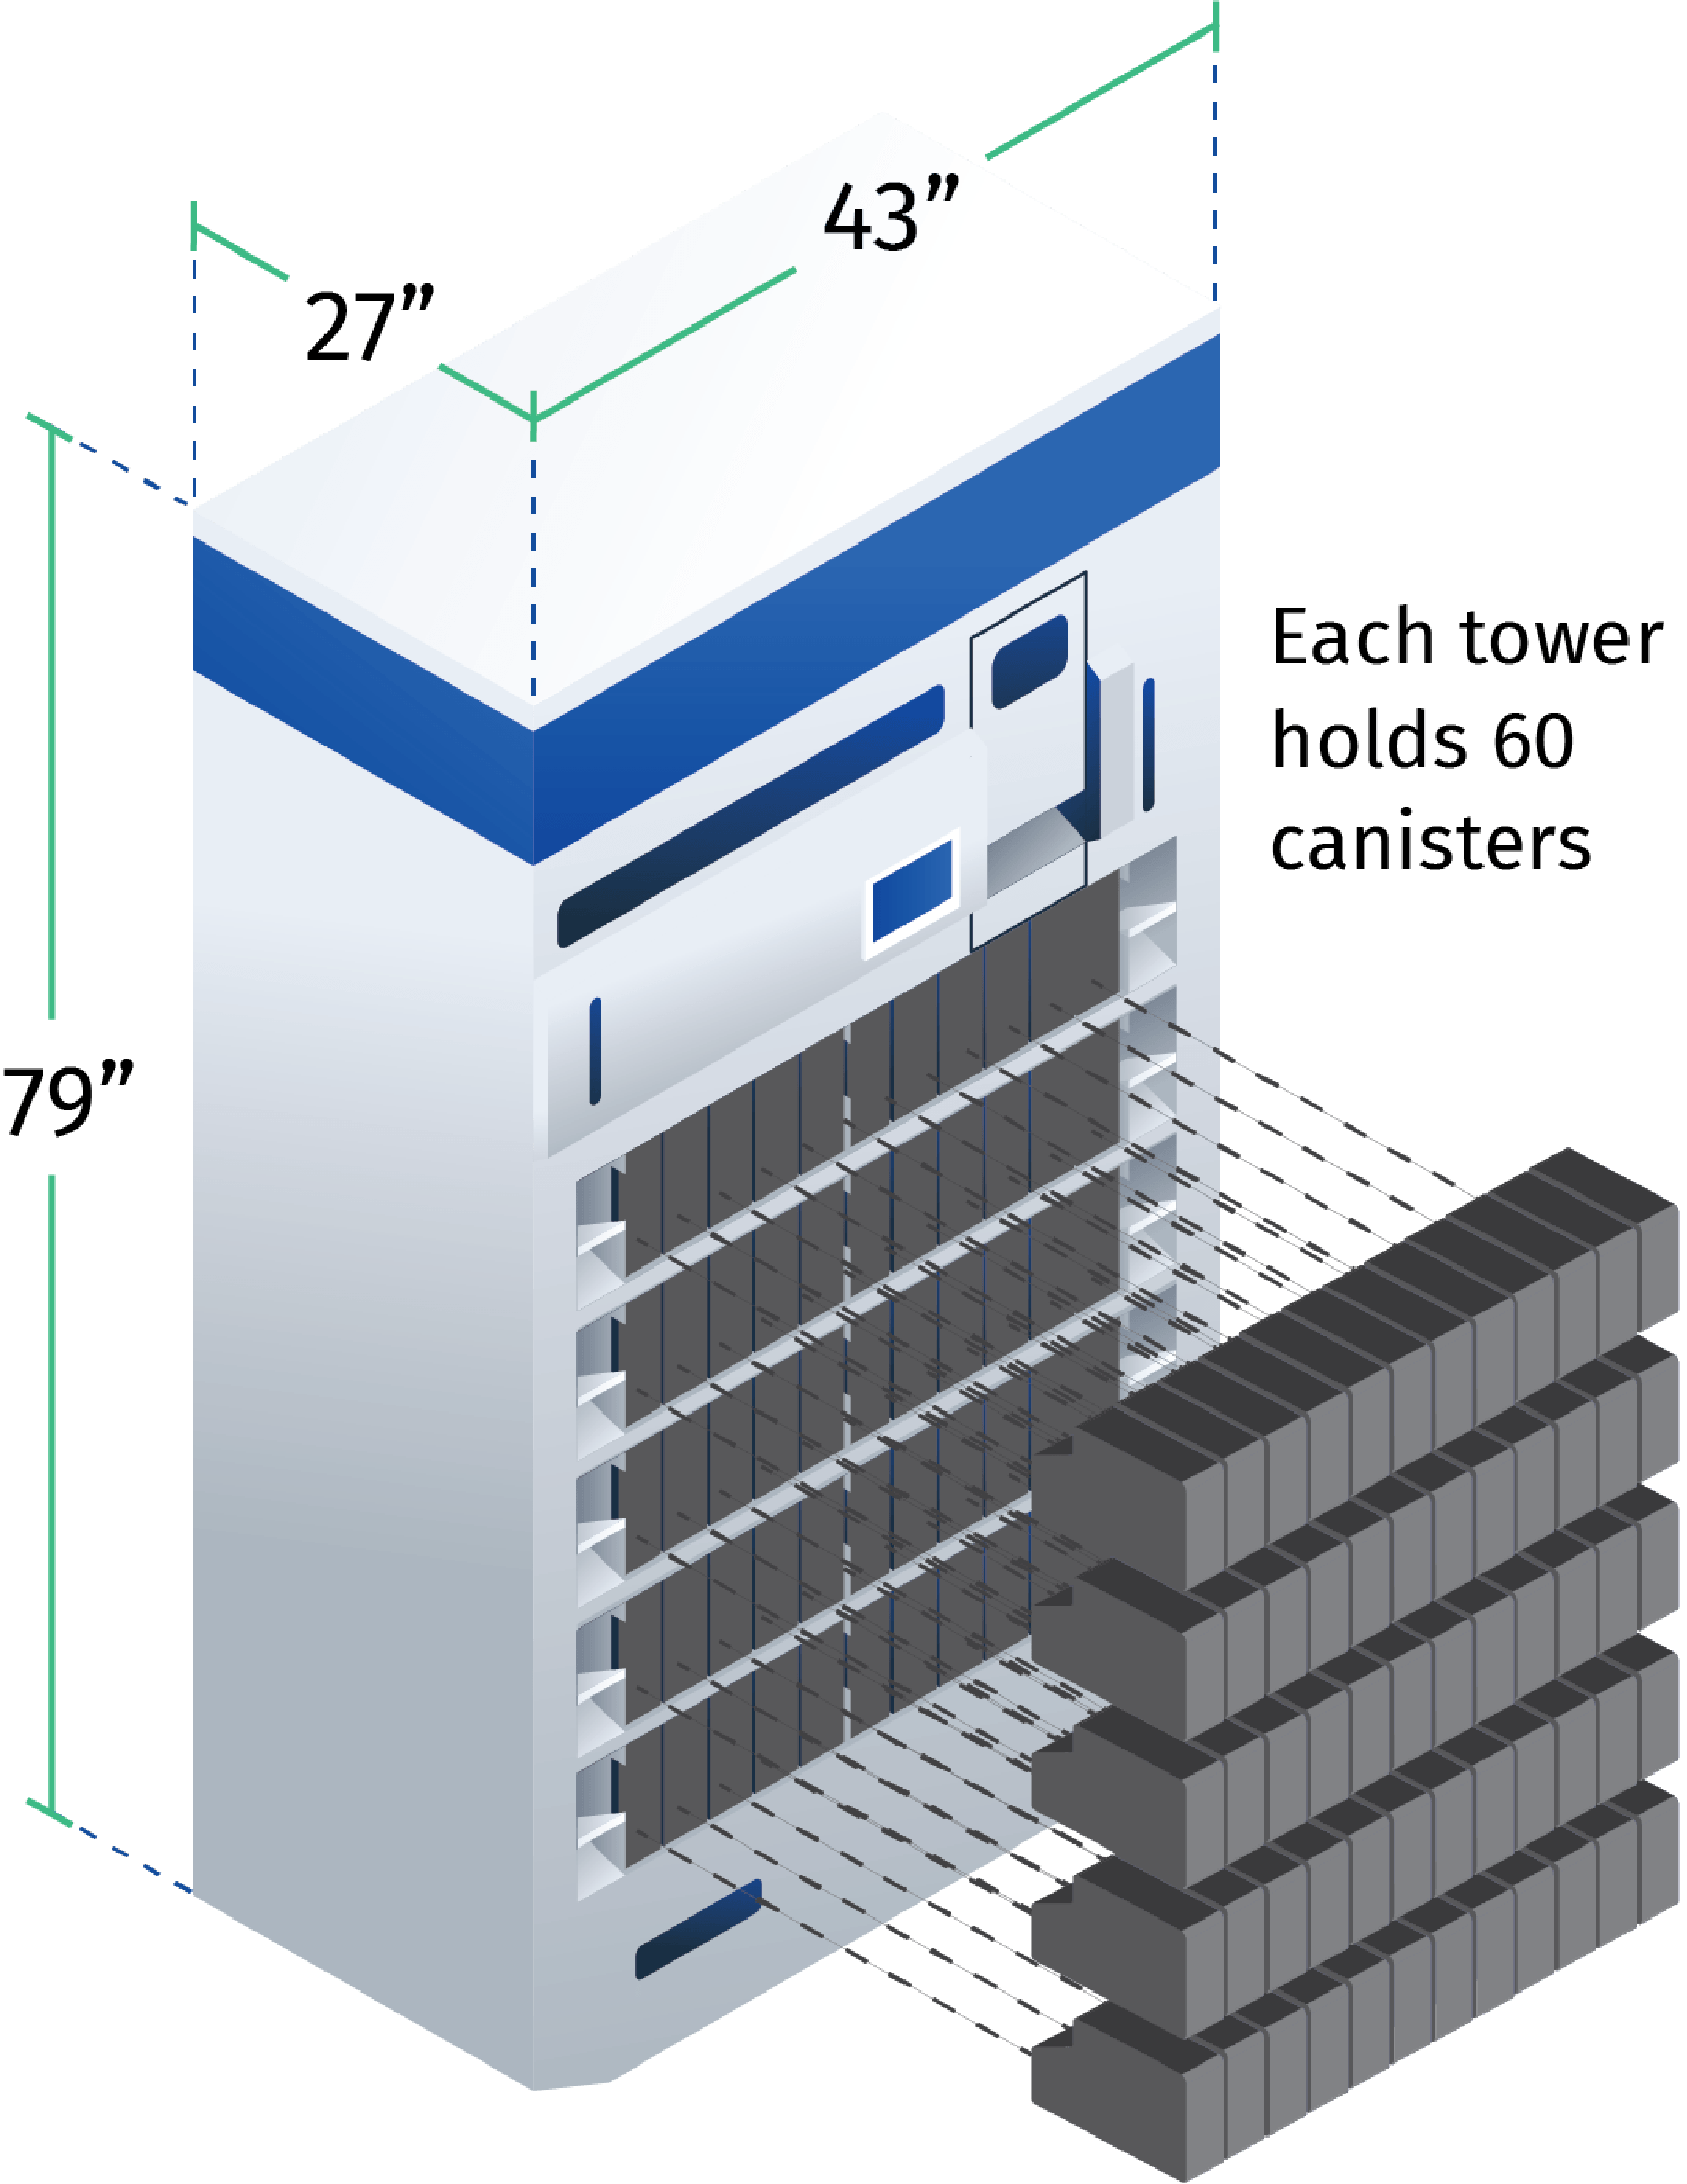 DOSIS towers have a small footprint